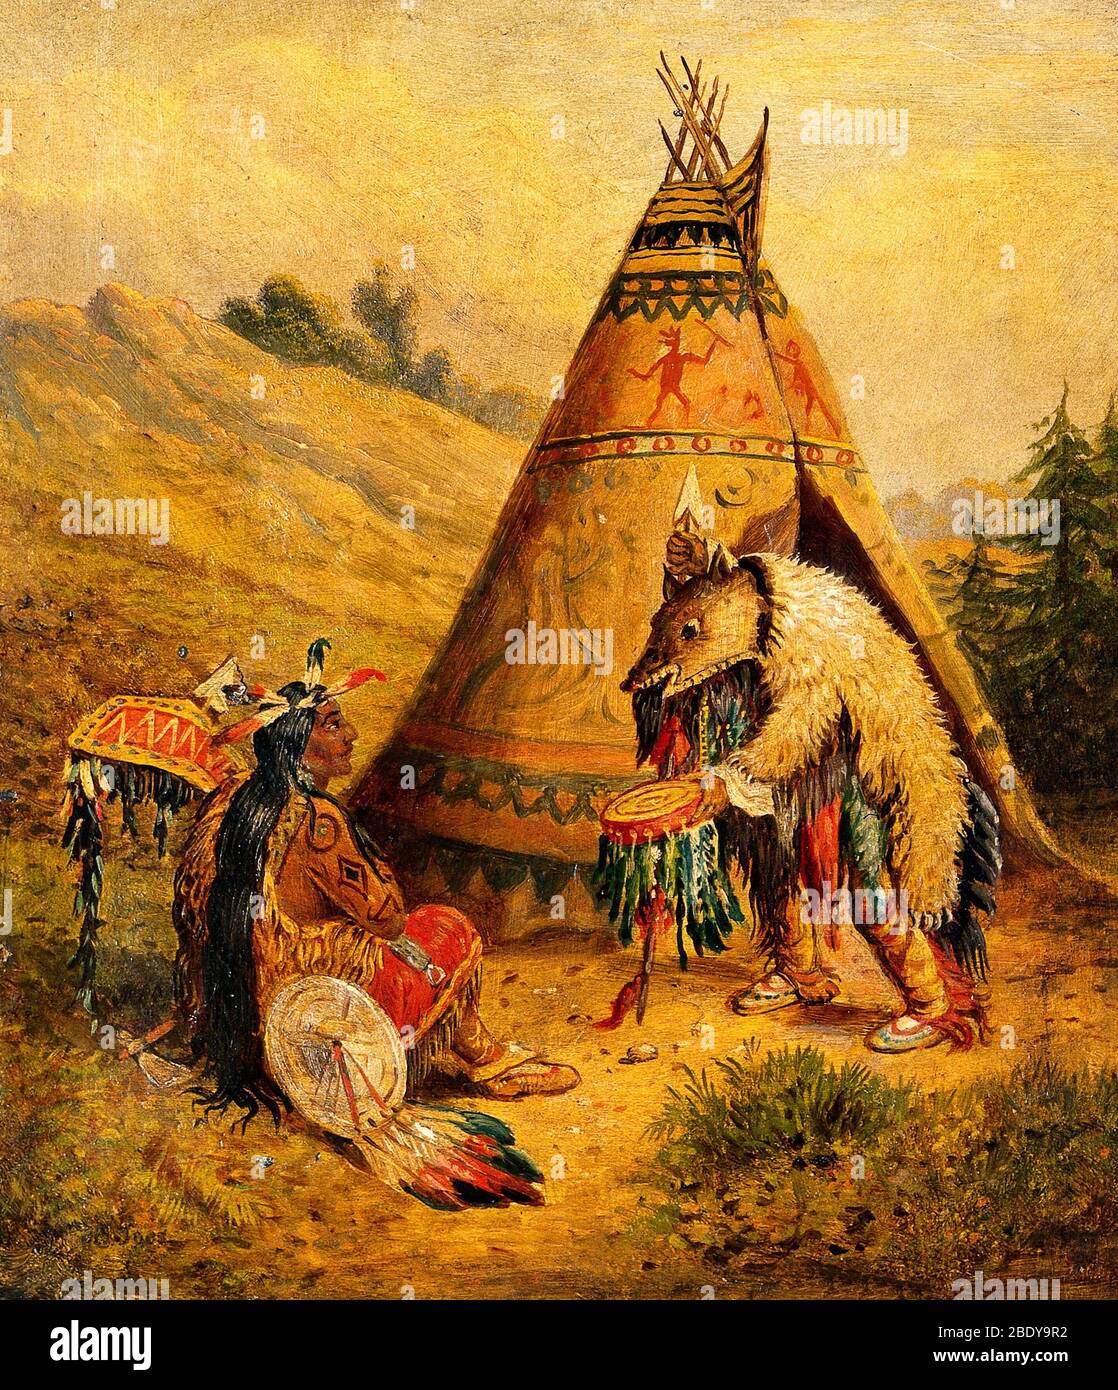 American Indian Shaman in Ceremonial Dress Stock Photo